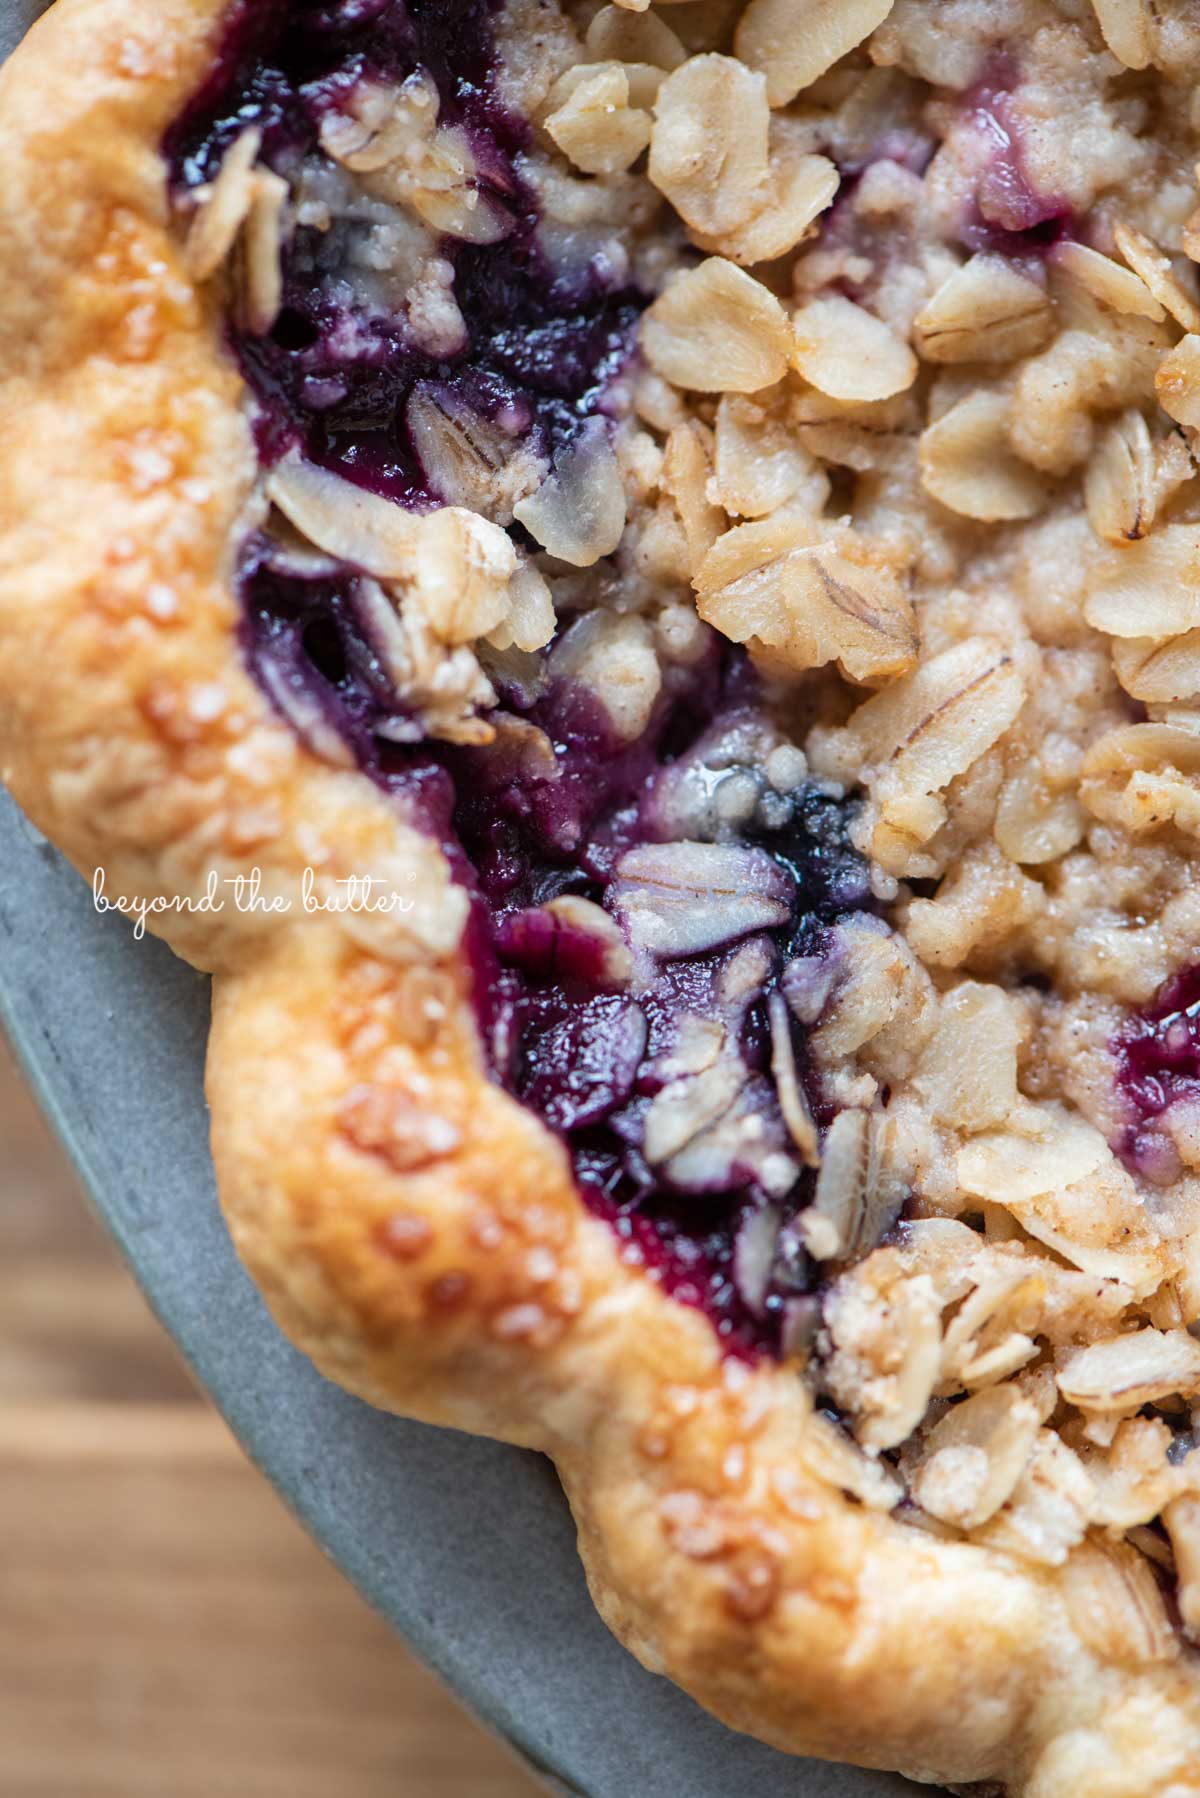 Upclose image of blueberry crumble pie crust edge | © Beyond the Butter®